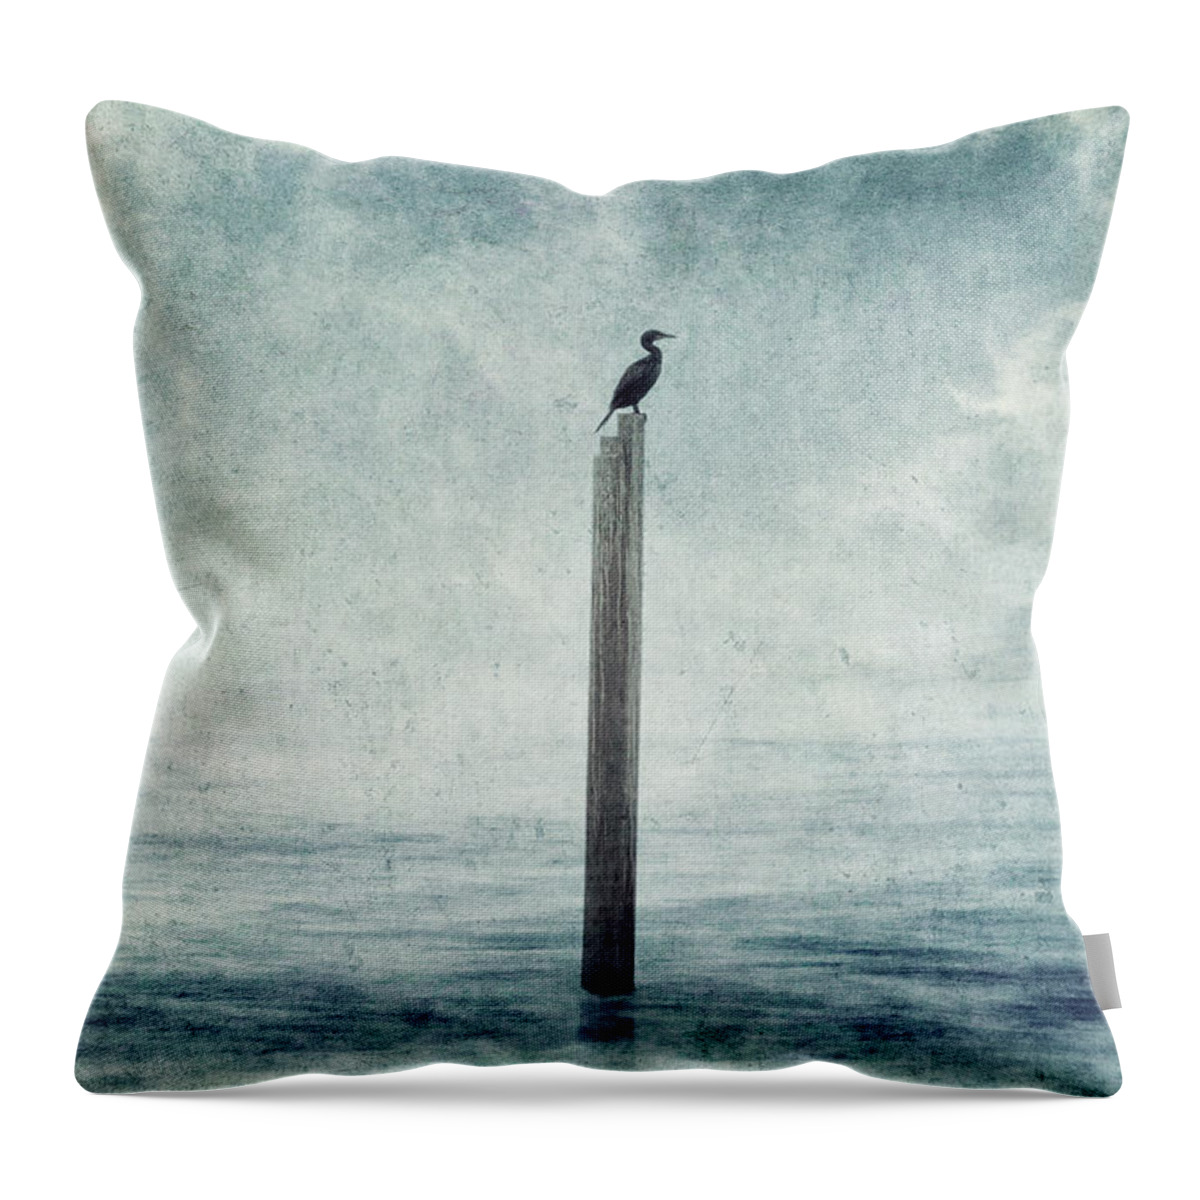 Fog Throw Pillow featuring the digital art Fogged In by Sandra Selle Rodriguez